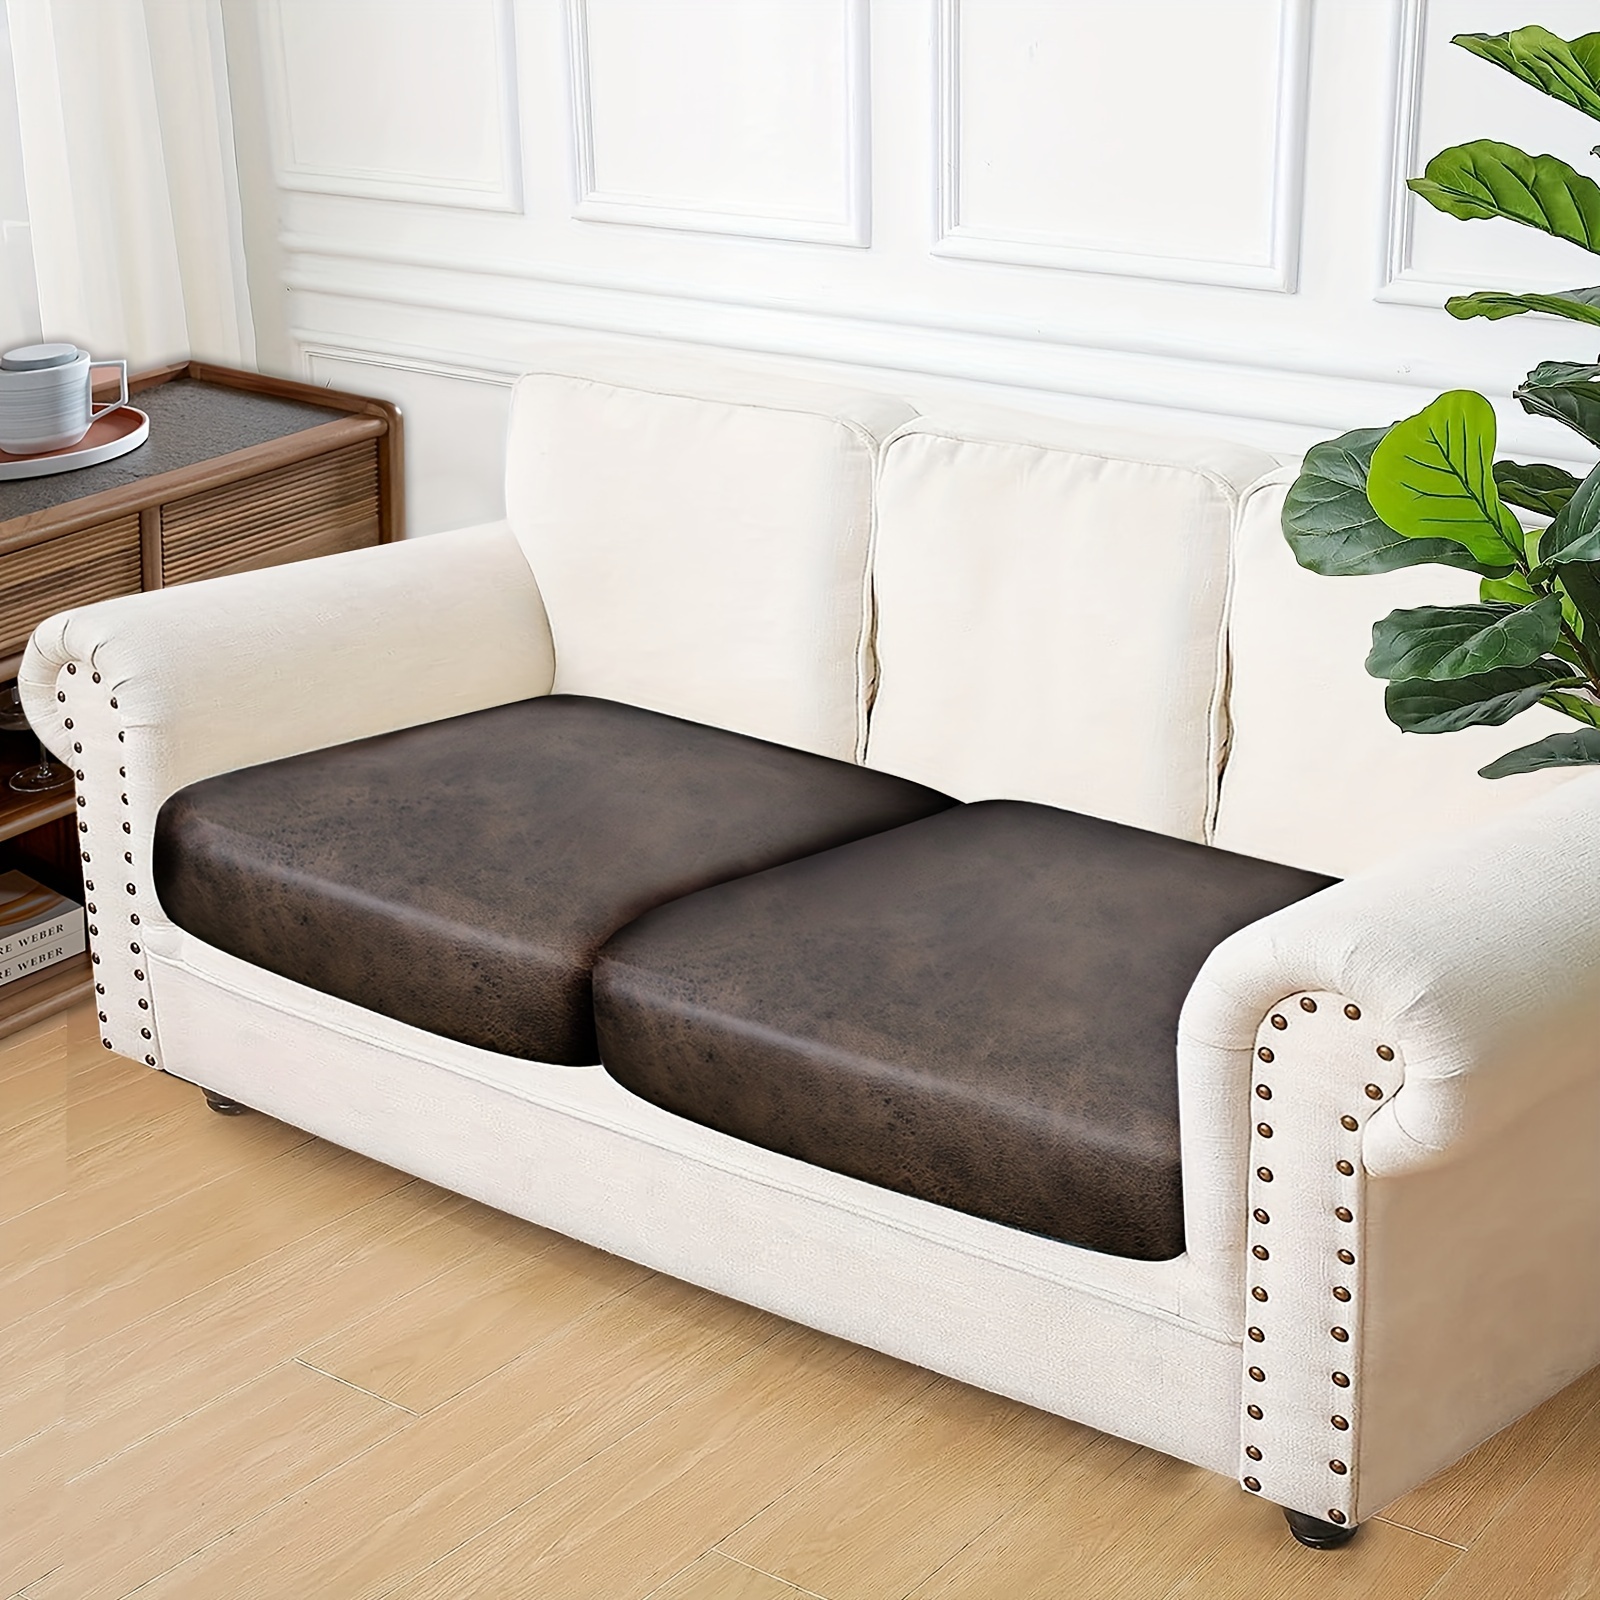 Couch Cover for Leather Couch Care and Maintenance - Archute